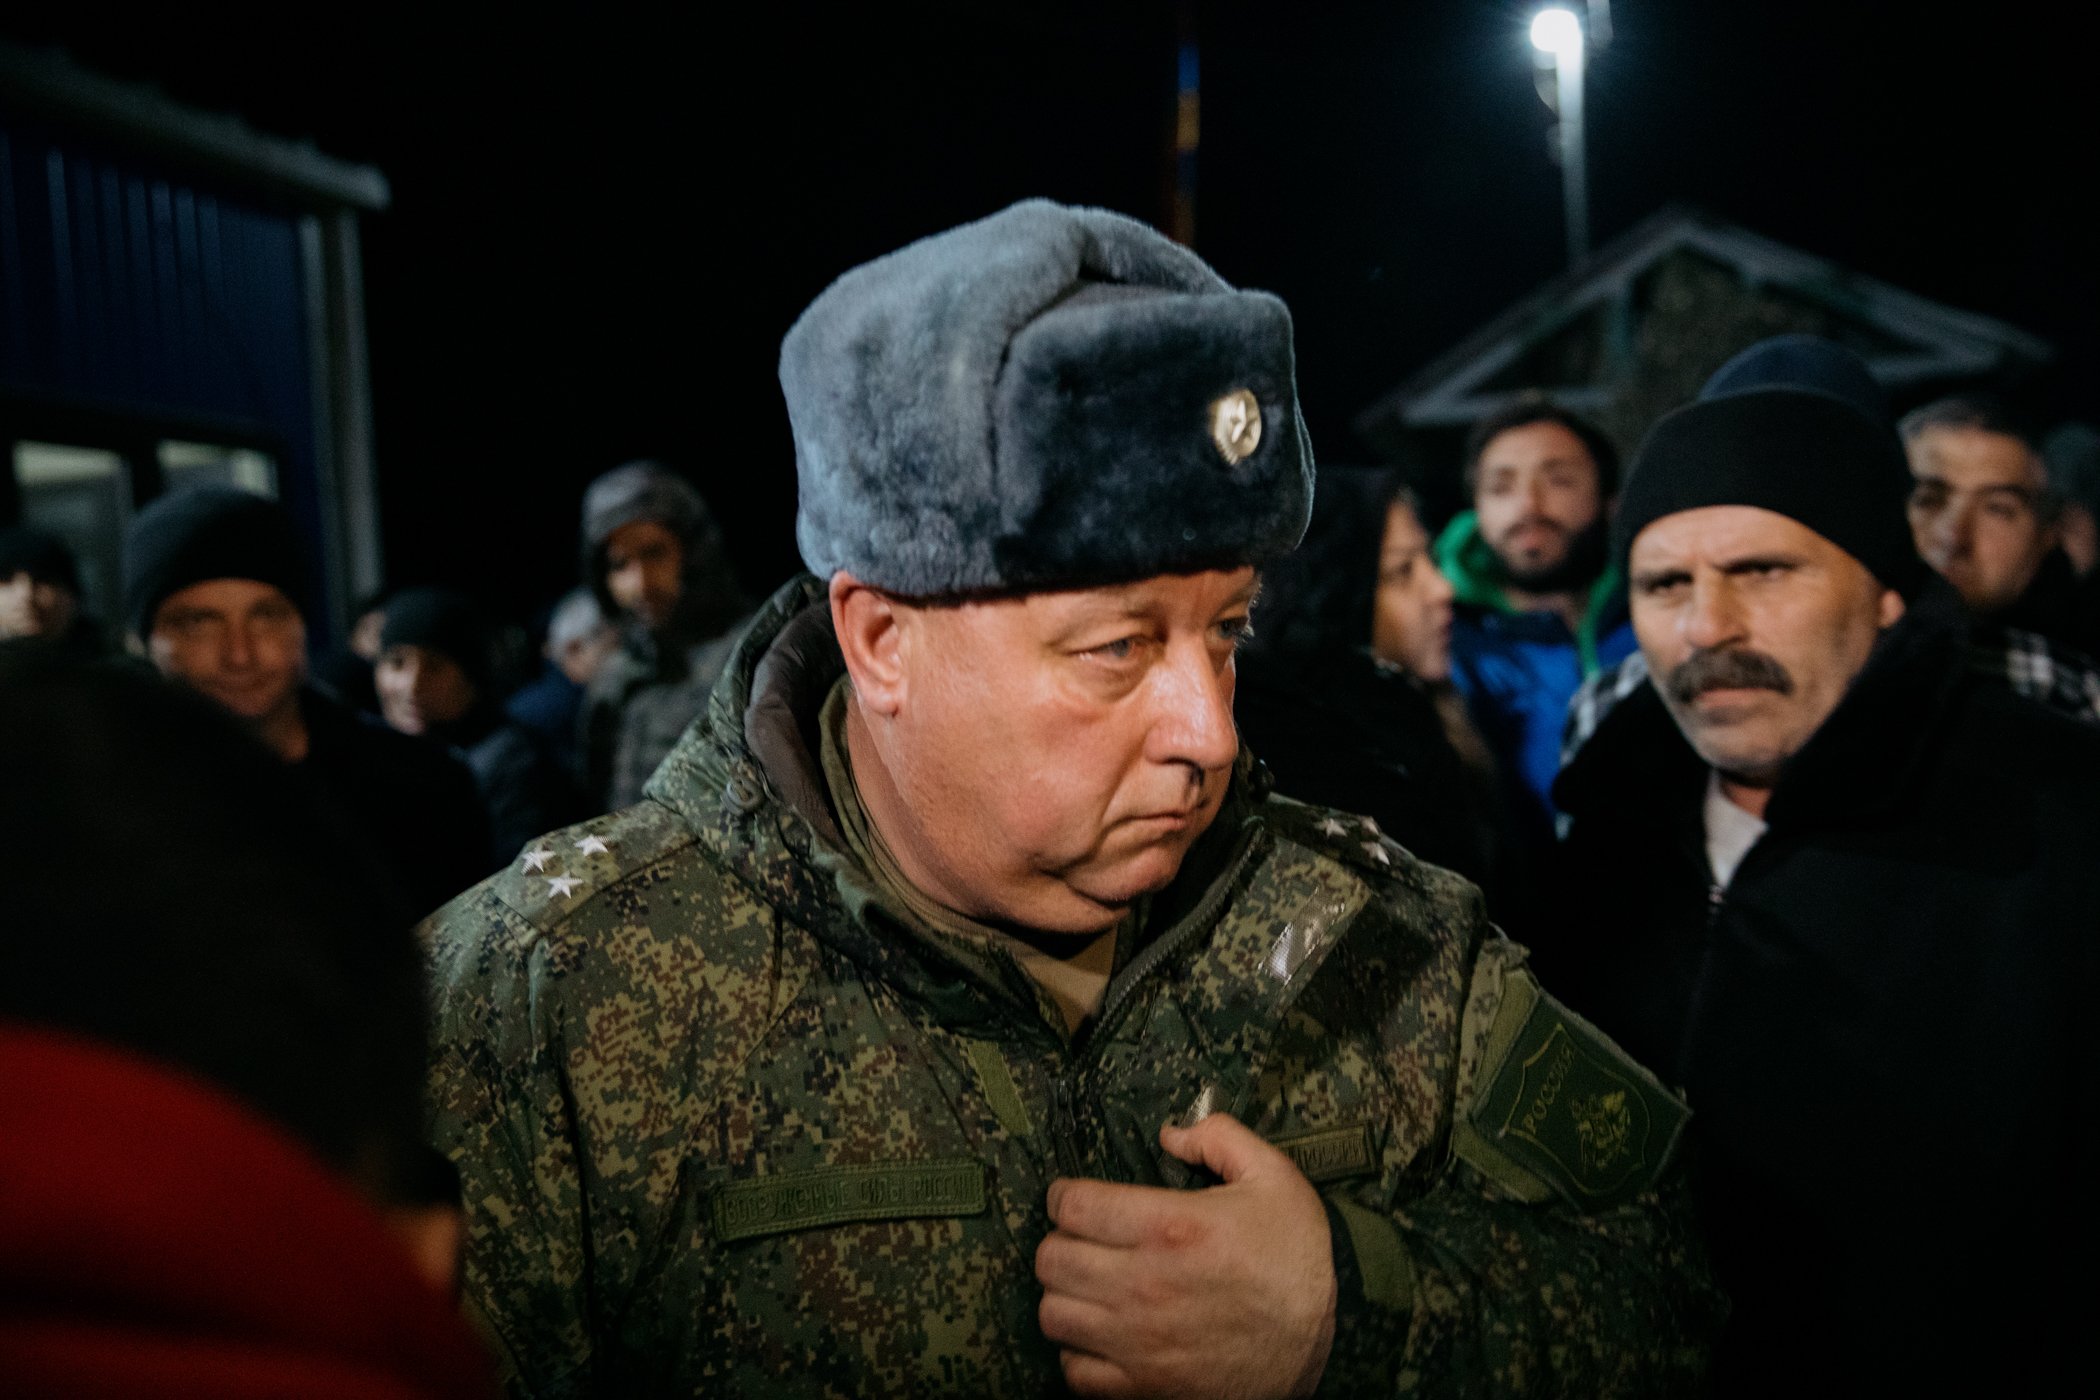  Igor Sazonov, a senior officer in the Russian peacekeeping force, leaves the Tegh checkpoint after negotiations with protestors demanding the reopening of the Lachin Corridor. Yura, right, is a resident of Stepanakert who travelled to Armenia with h